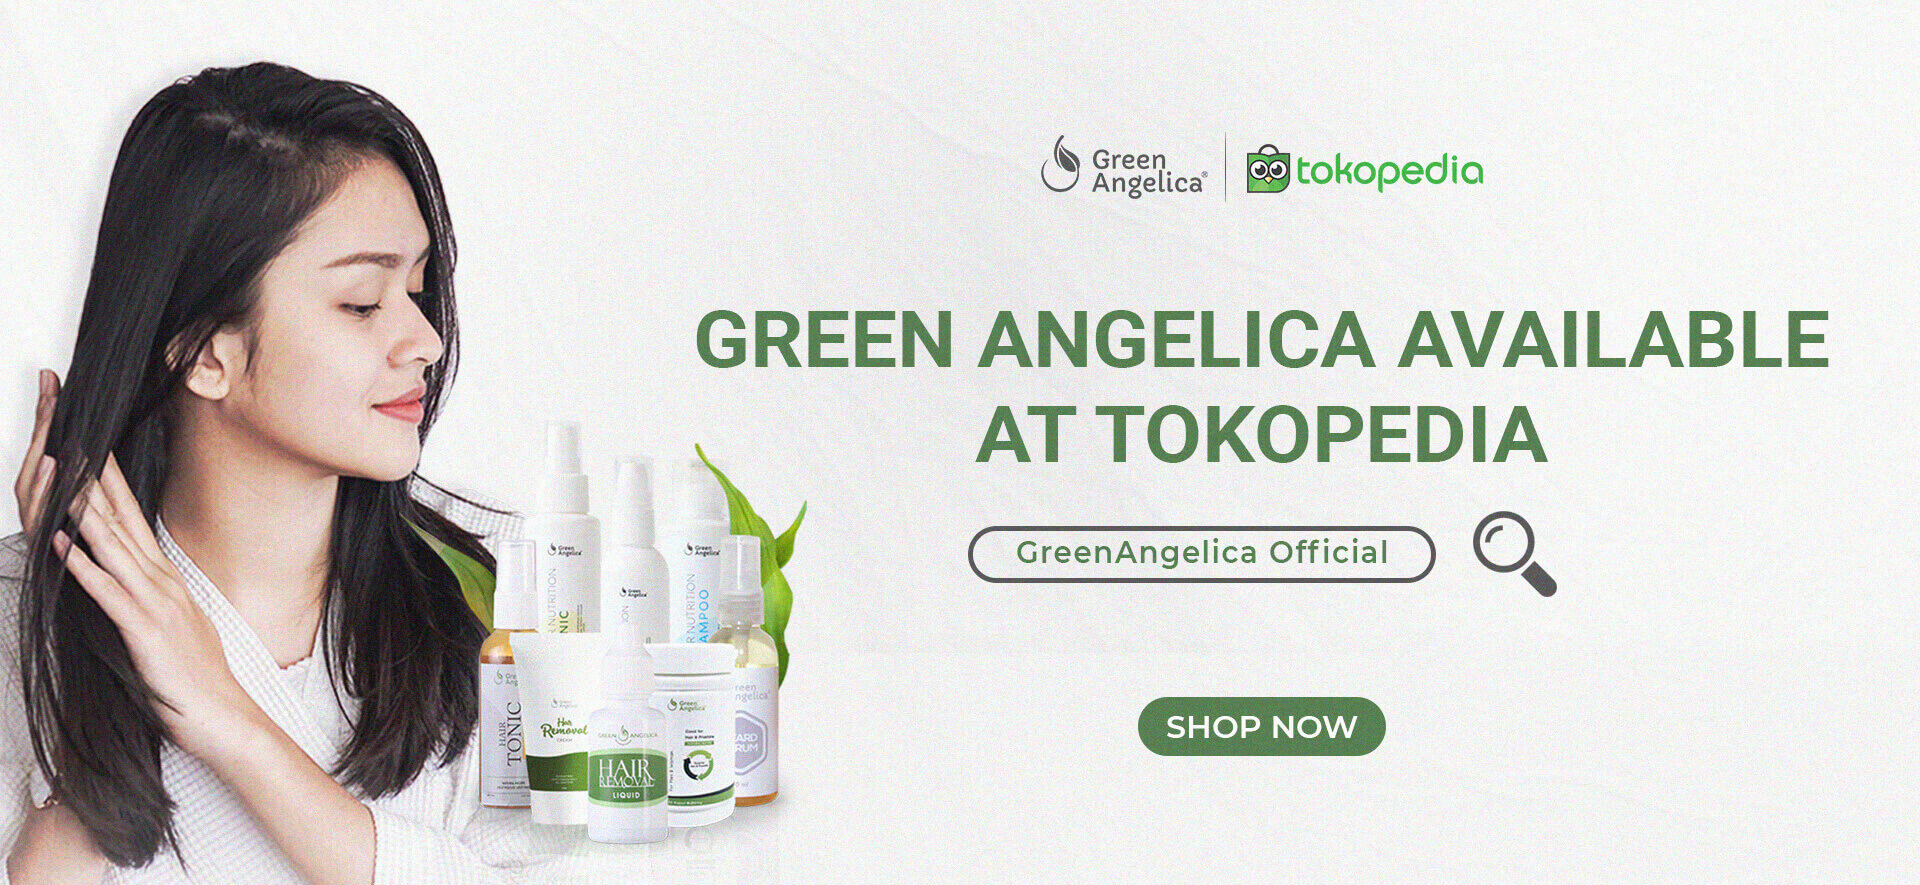 Tokopedia Official Store Green Angelica